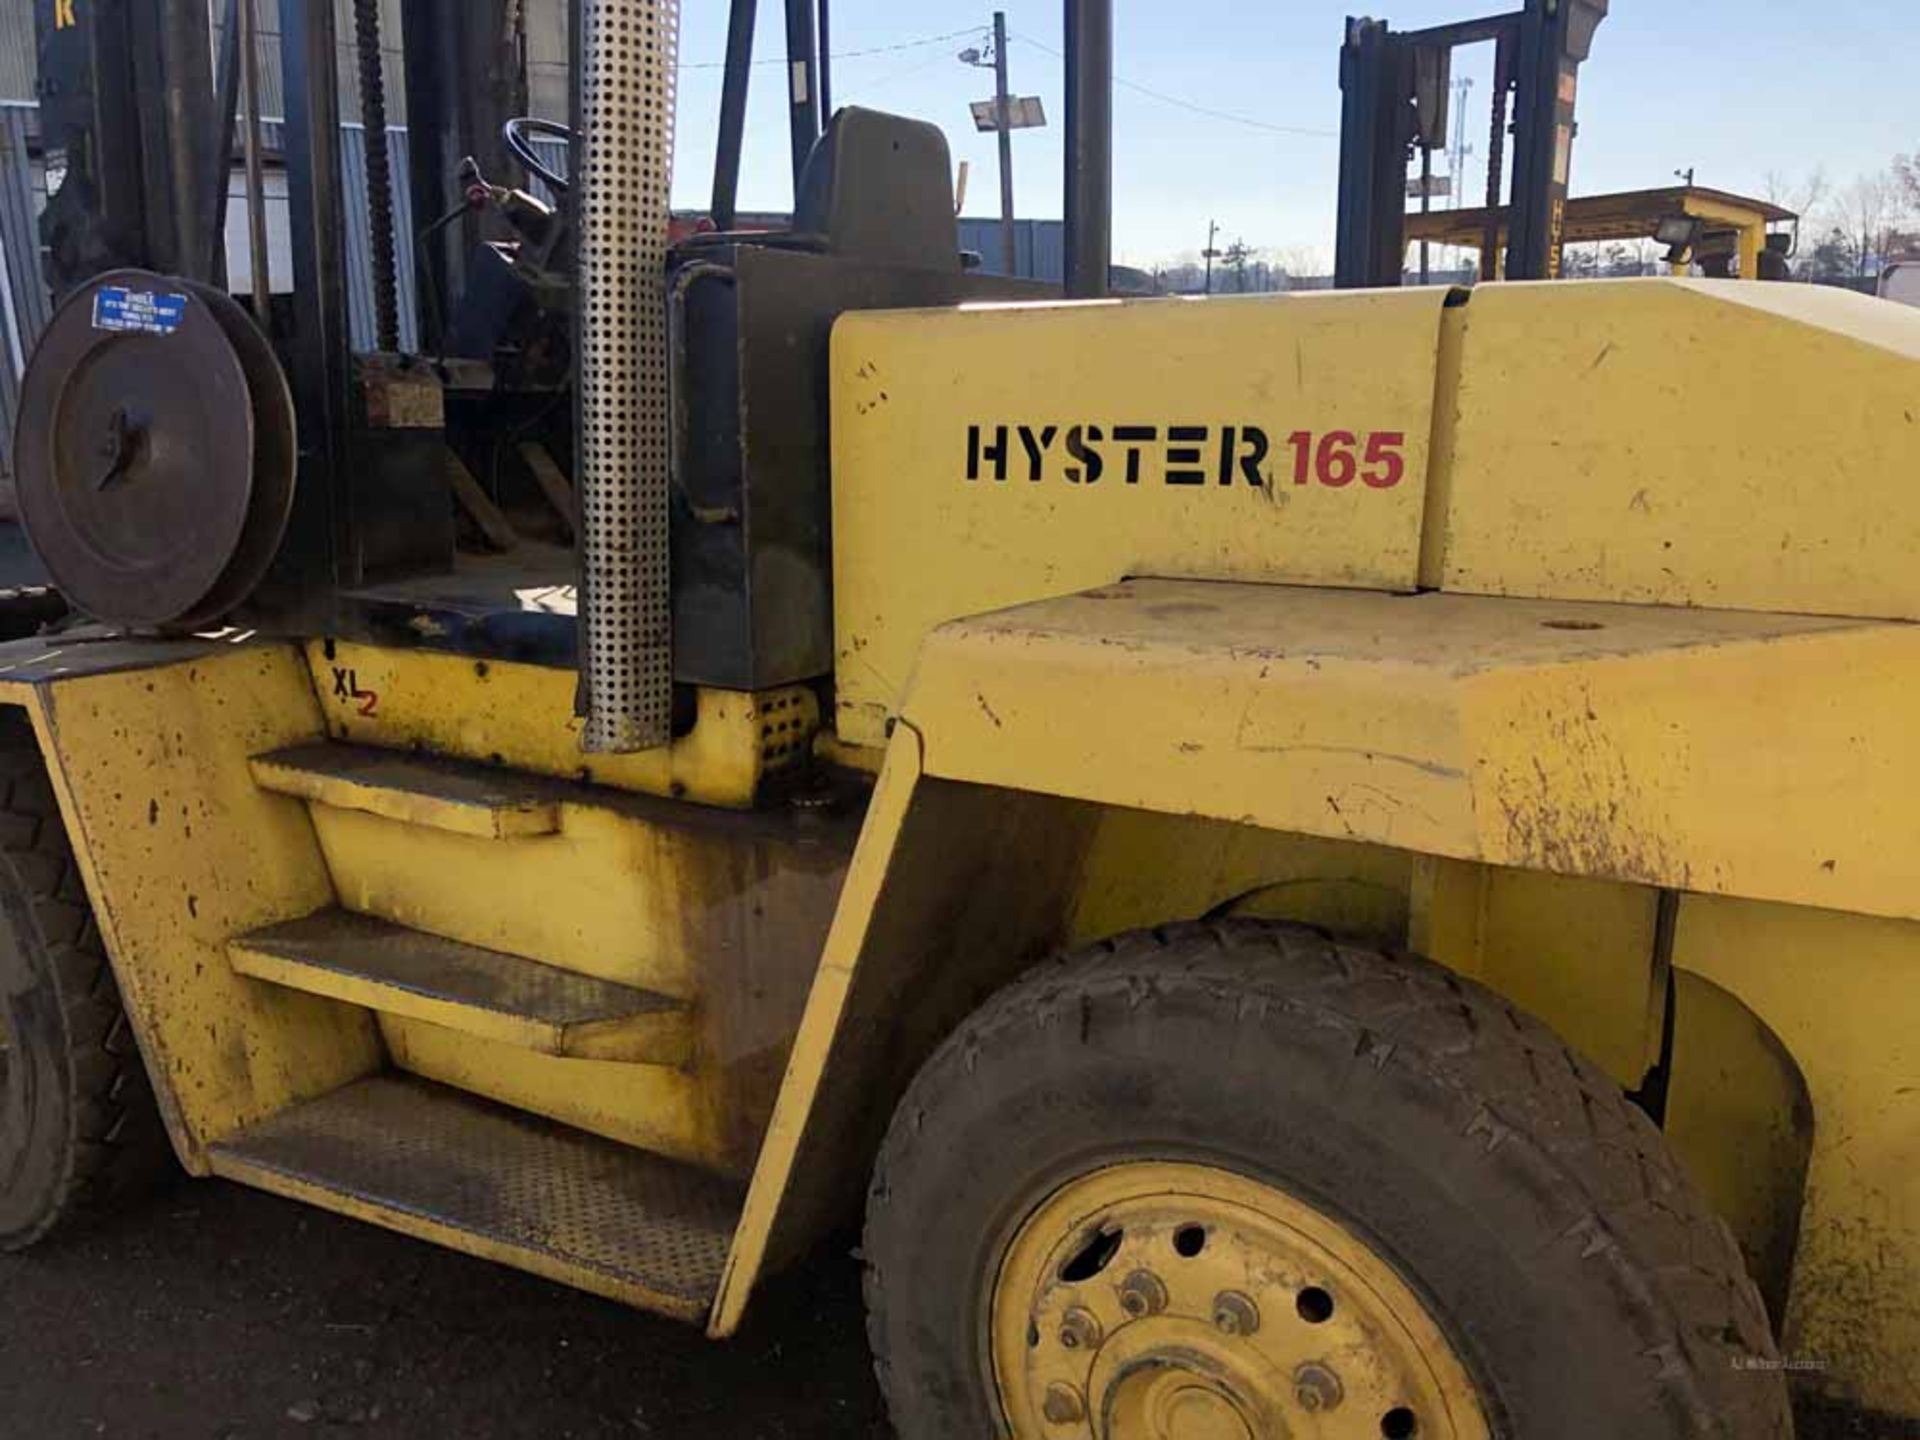 Hyster XL2, Forklift, 804 Hours,26,600 Pounds - Image 6 of 8